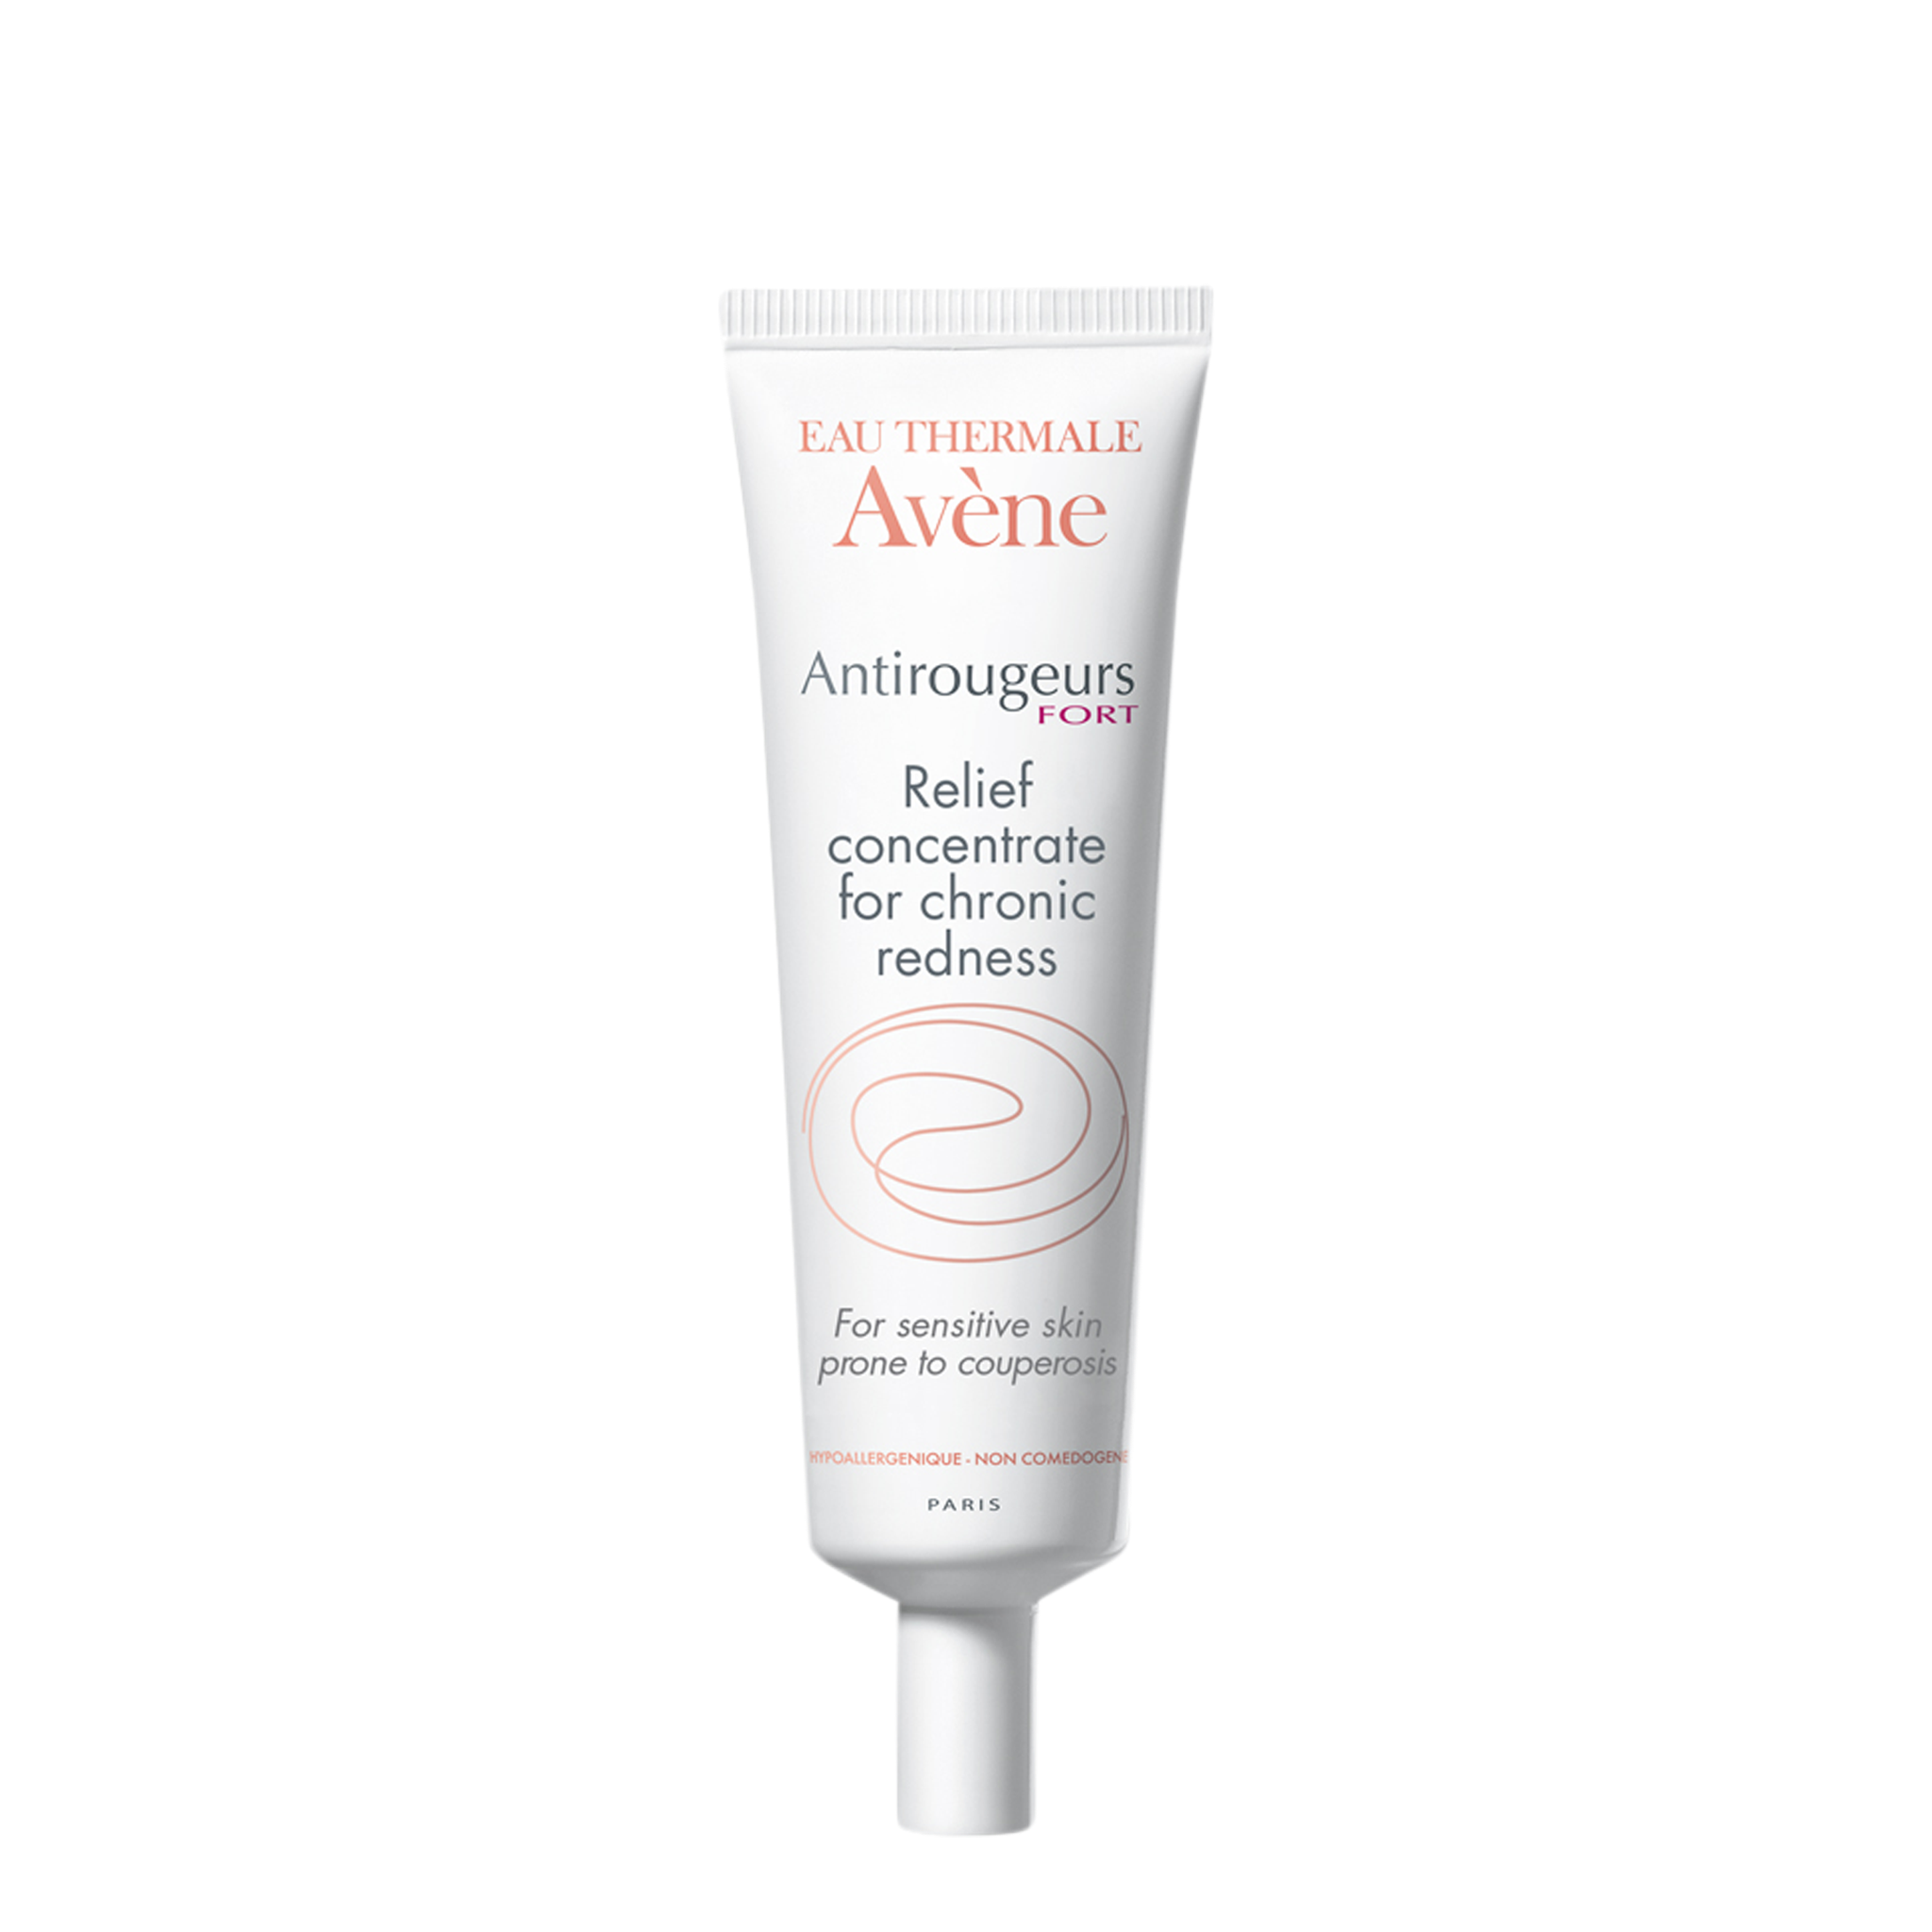 Avène Antirougeurs Fort Relief Concentrate 30ml - Concentrate for Redness-Prone Skin